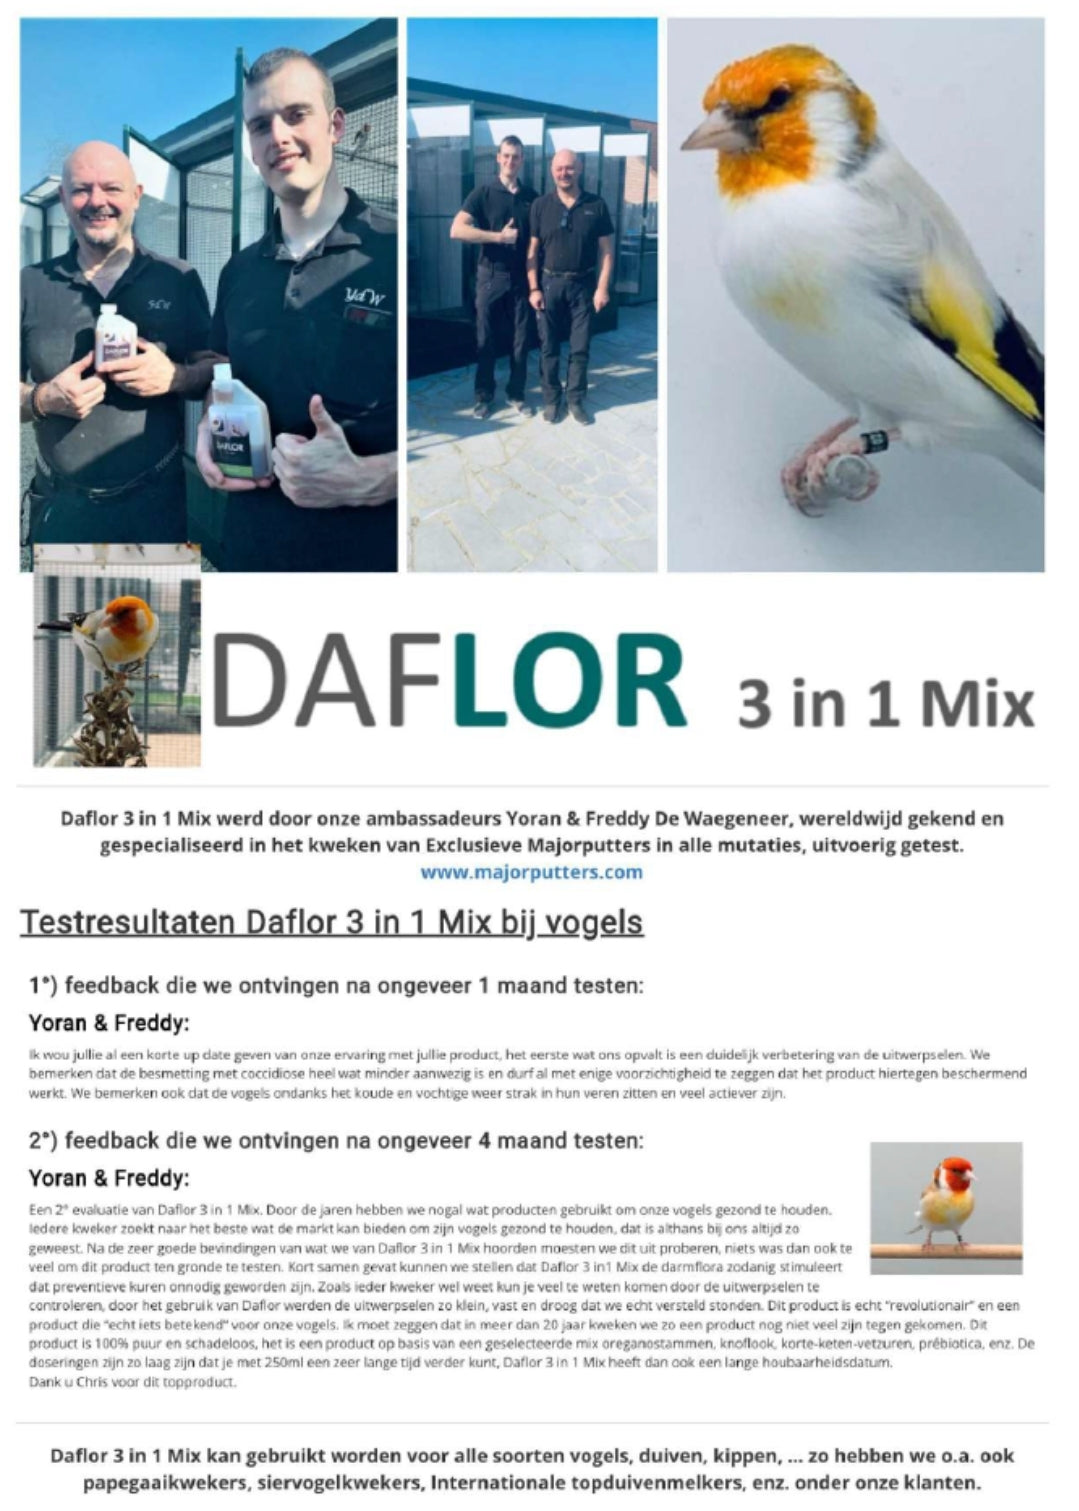 Daflor 3 in 1 Mix 500ml